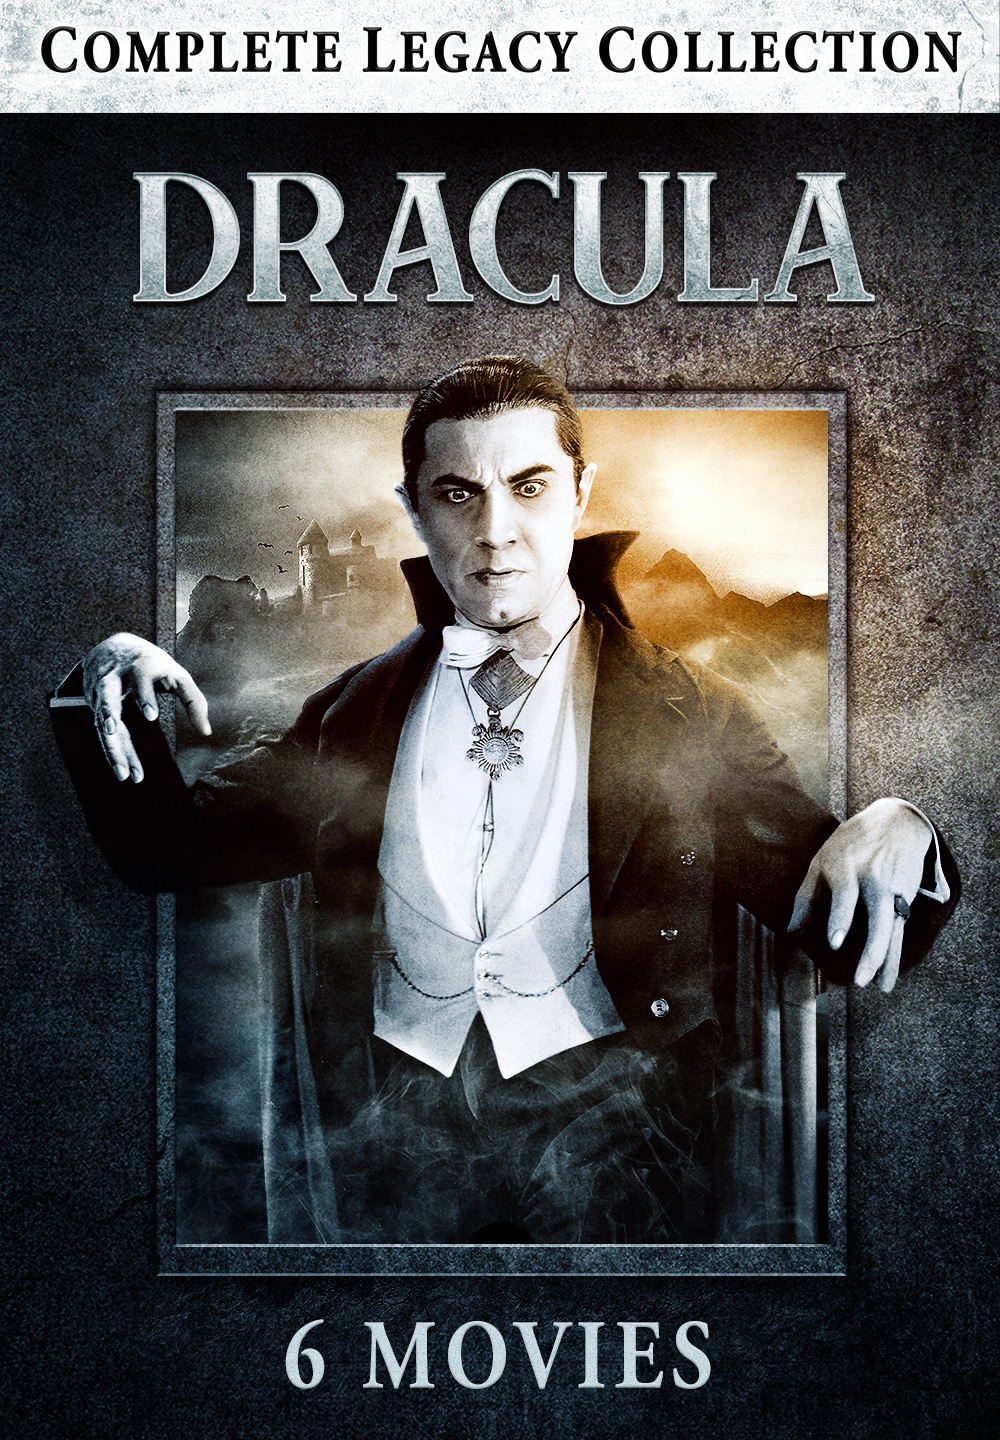 Dracula: Complete Legacy Collection - Digital Code - SD